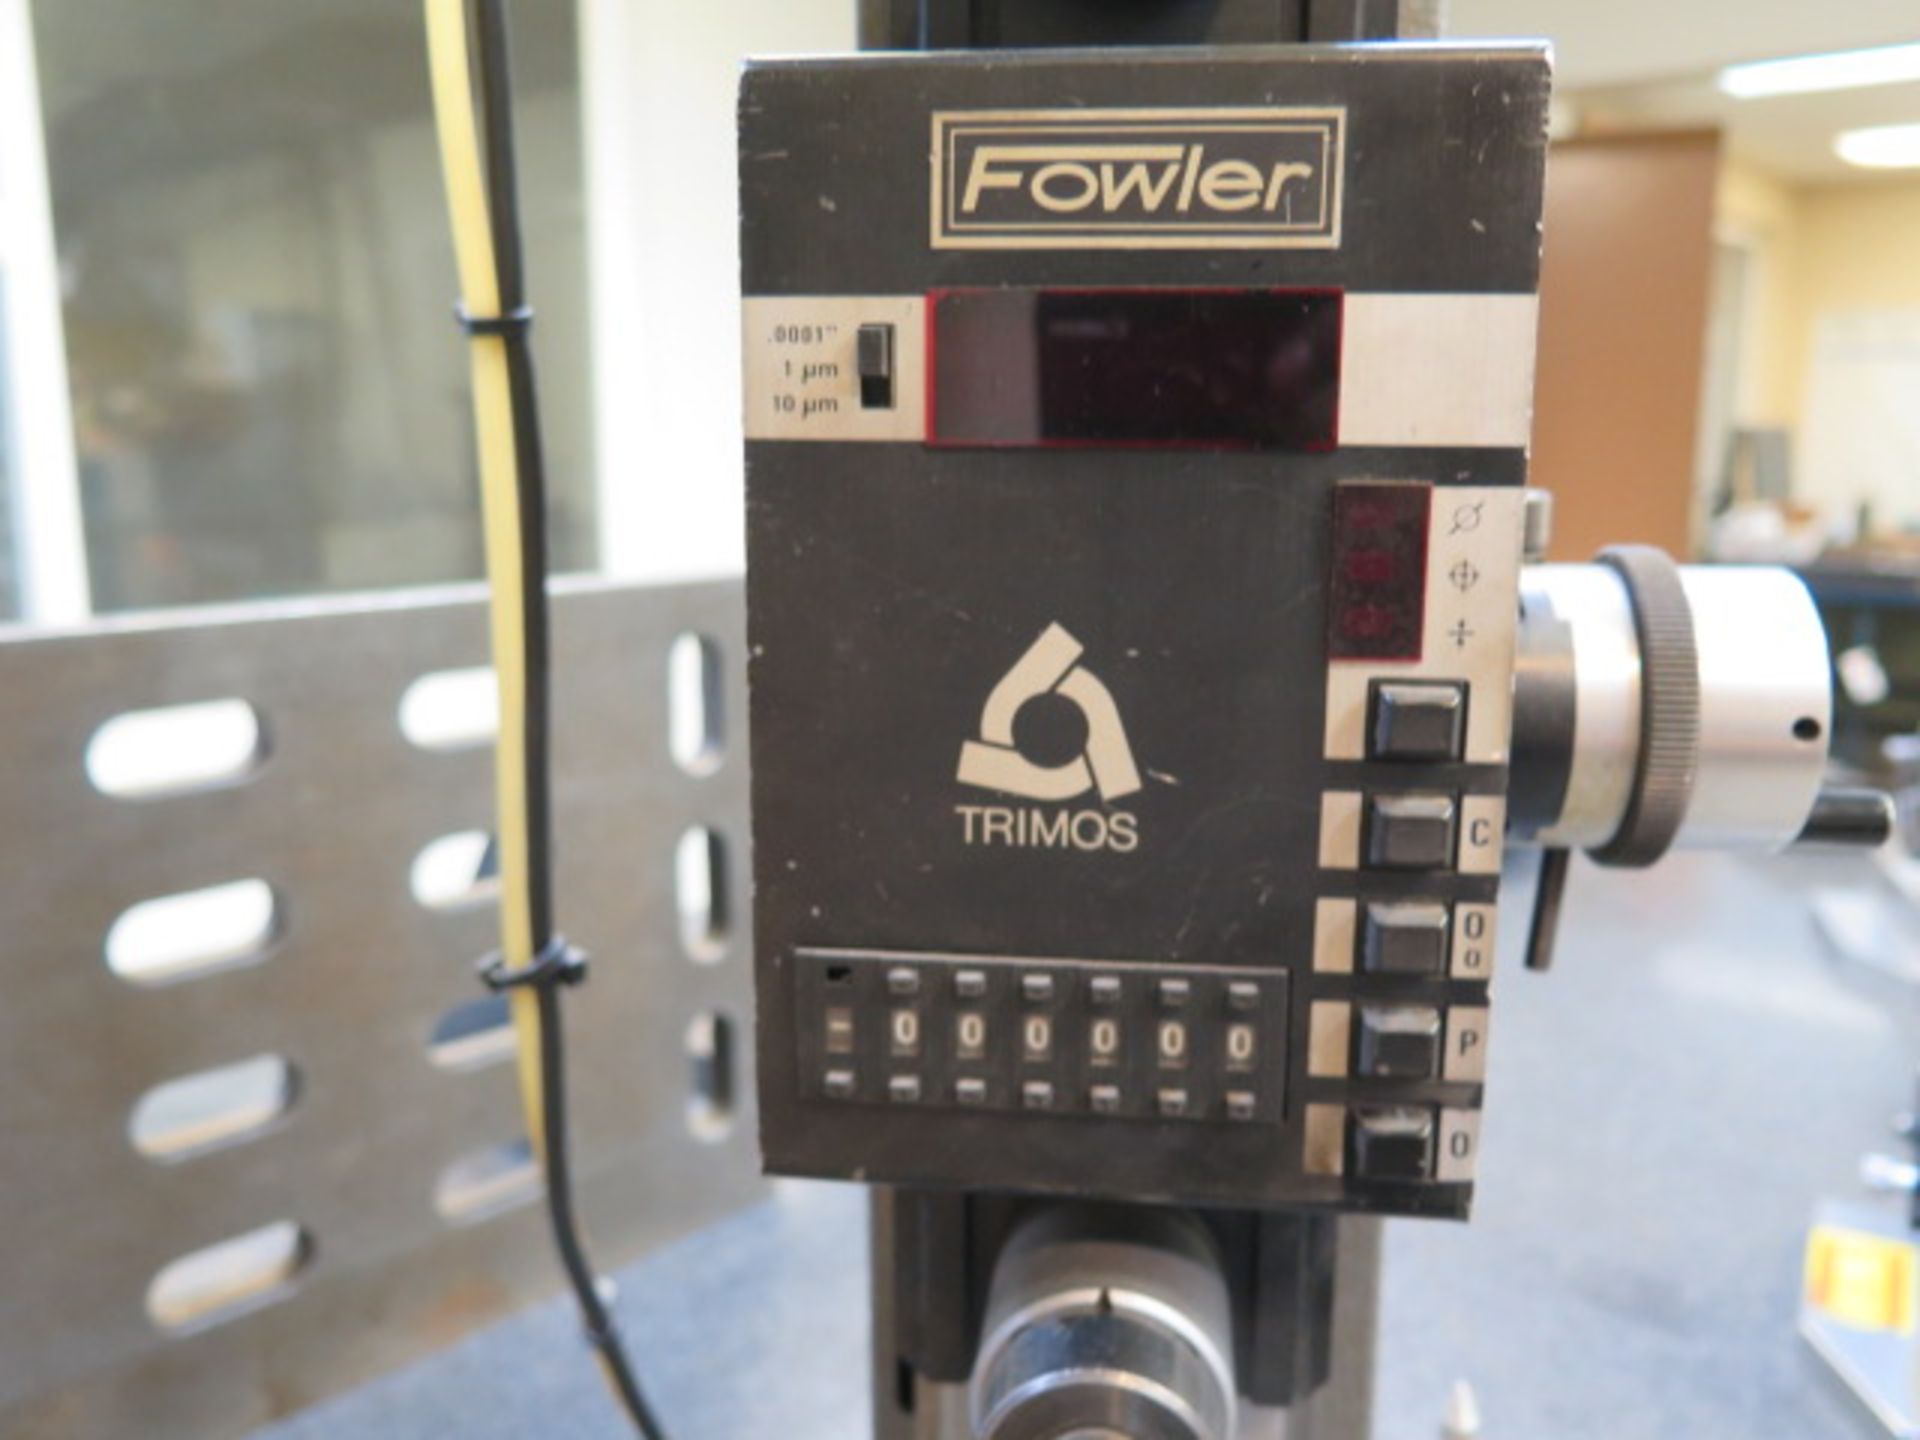 Fowler Trimos "Vertical" 18" Digital Height Gage (SOLD AS-IS - NO WARRANTY) - Image 7 of 13